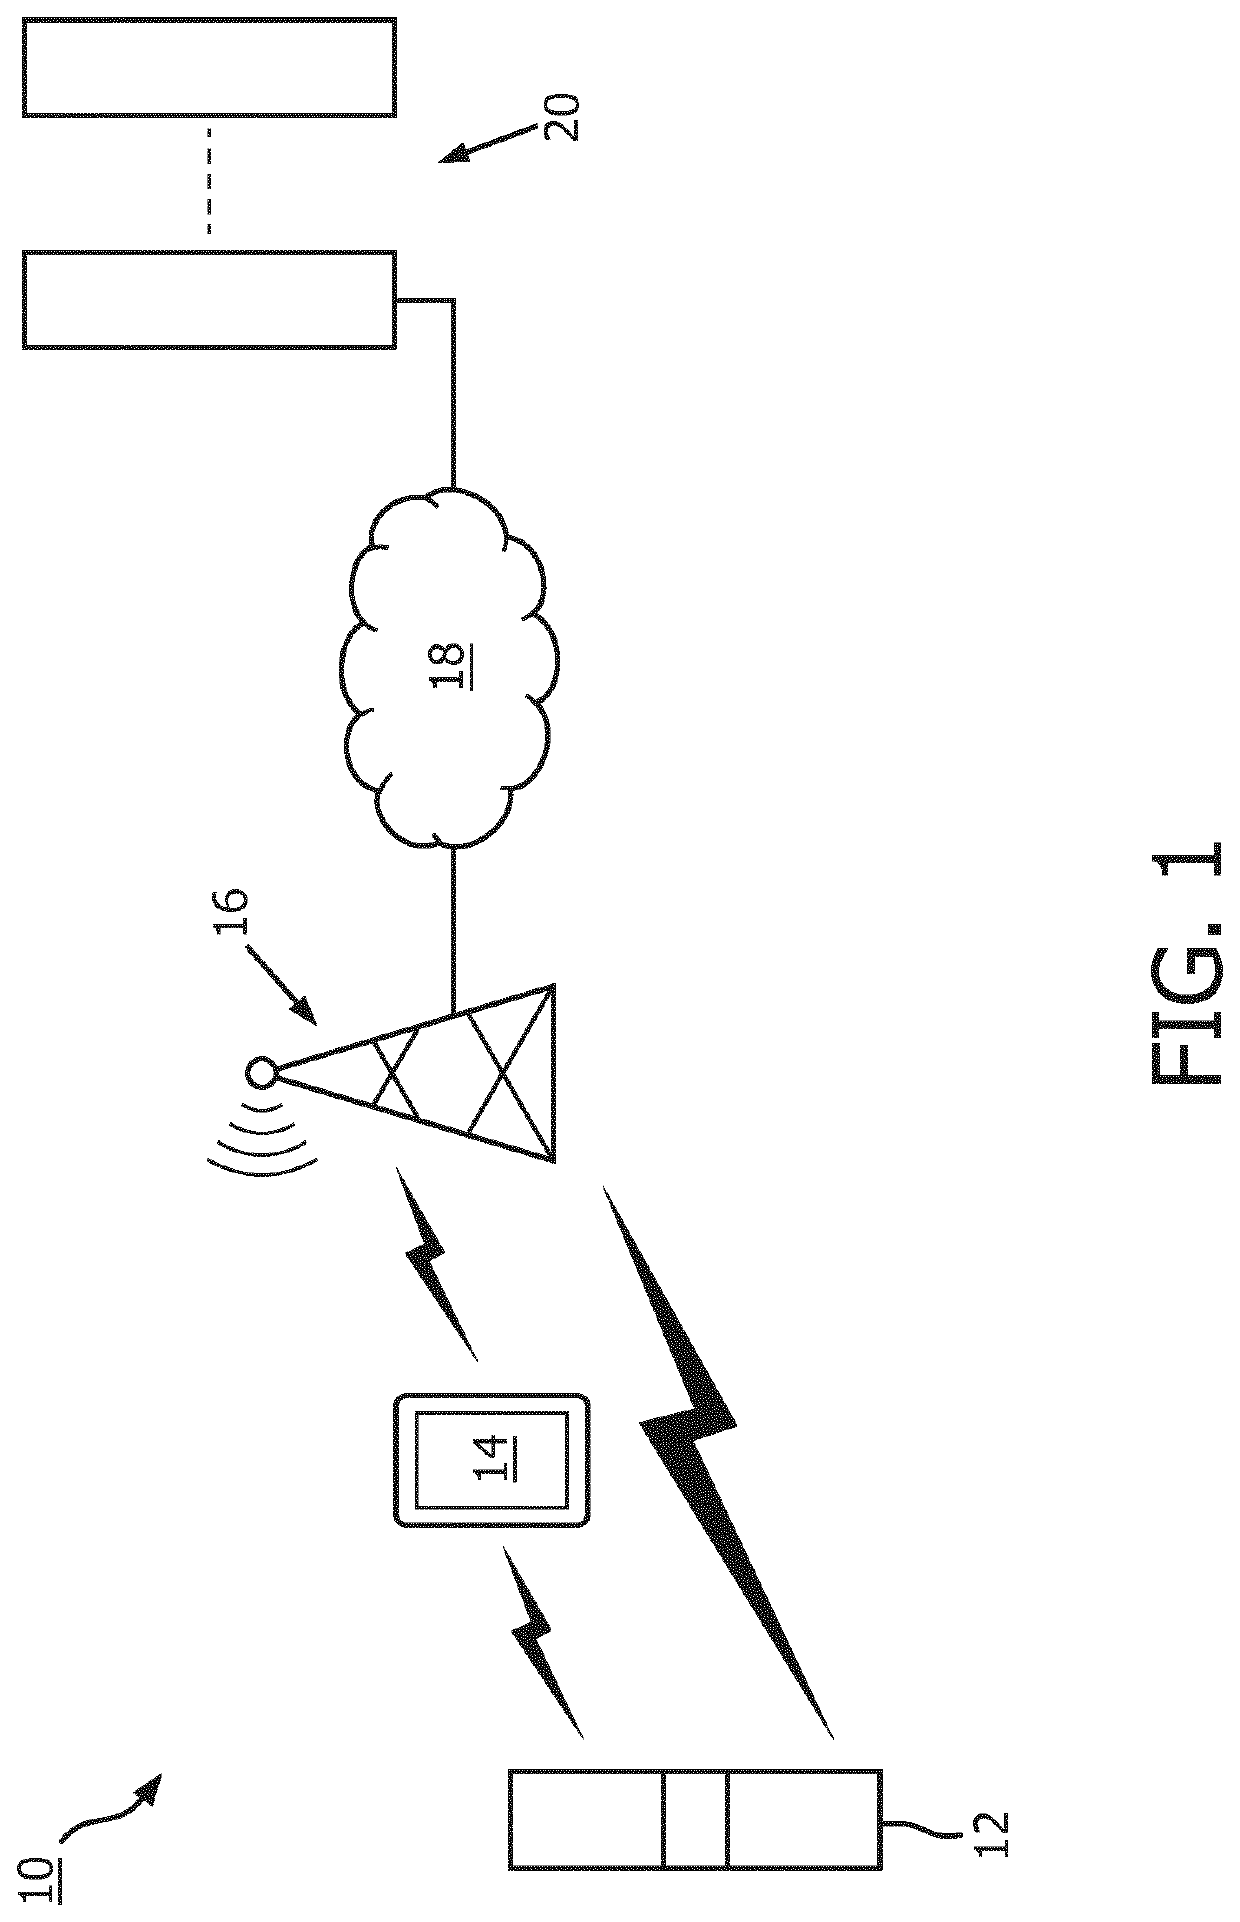 Wrist fall detector based on arm direction